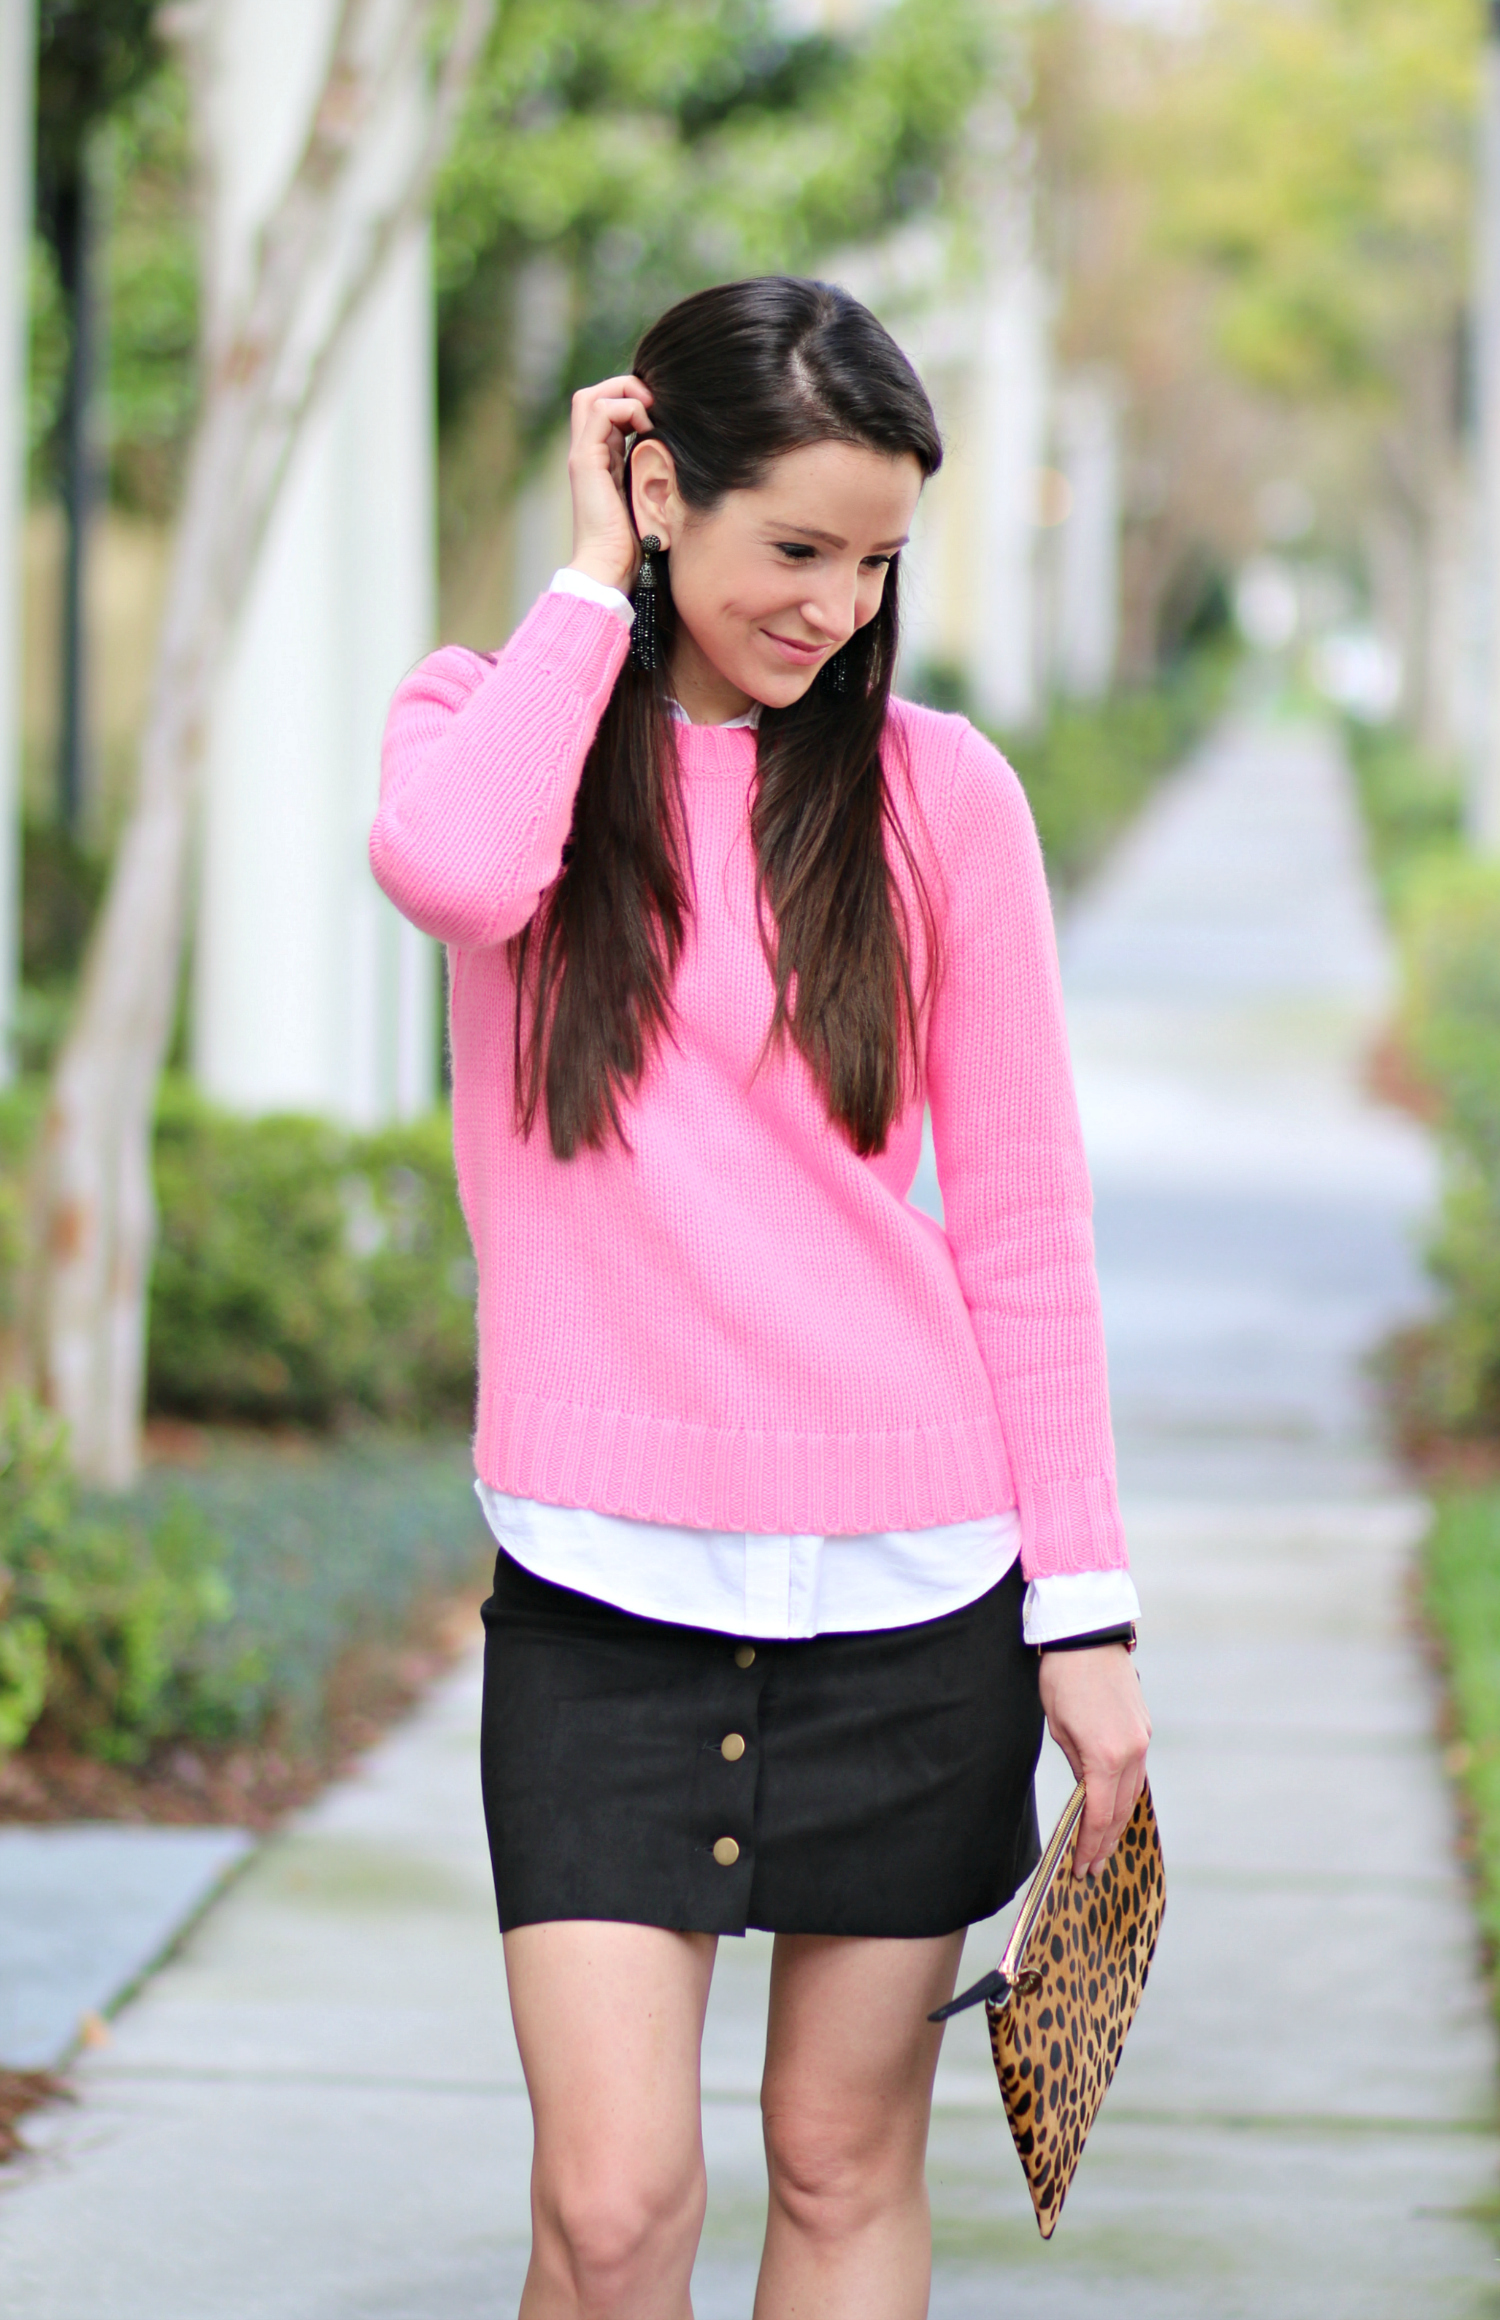 A preppy, dressy casual hot pink crewneck sweater outfit from J.Crew Factory and SheIn